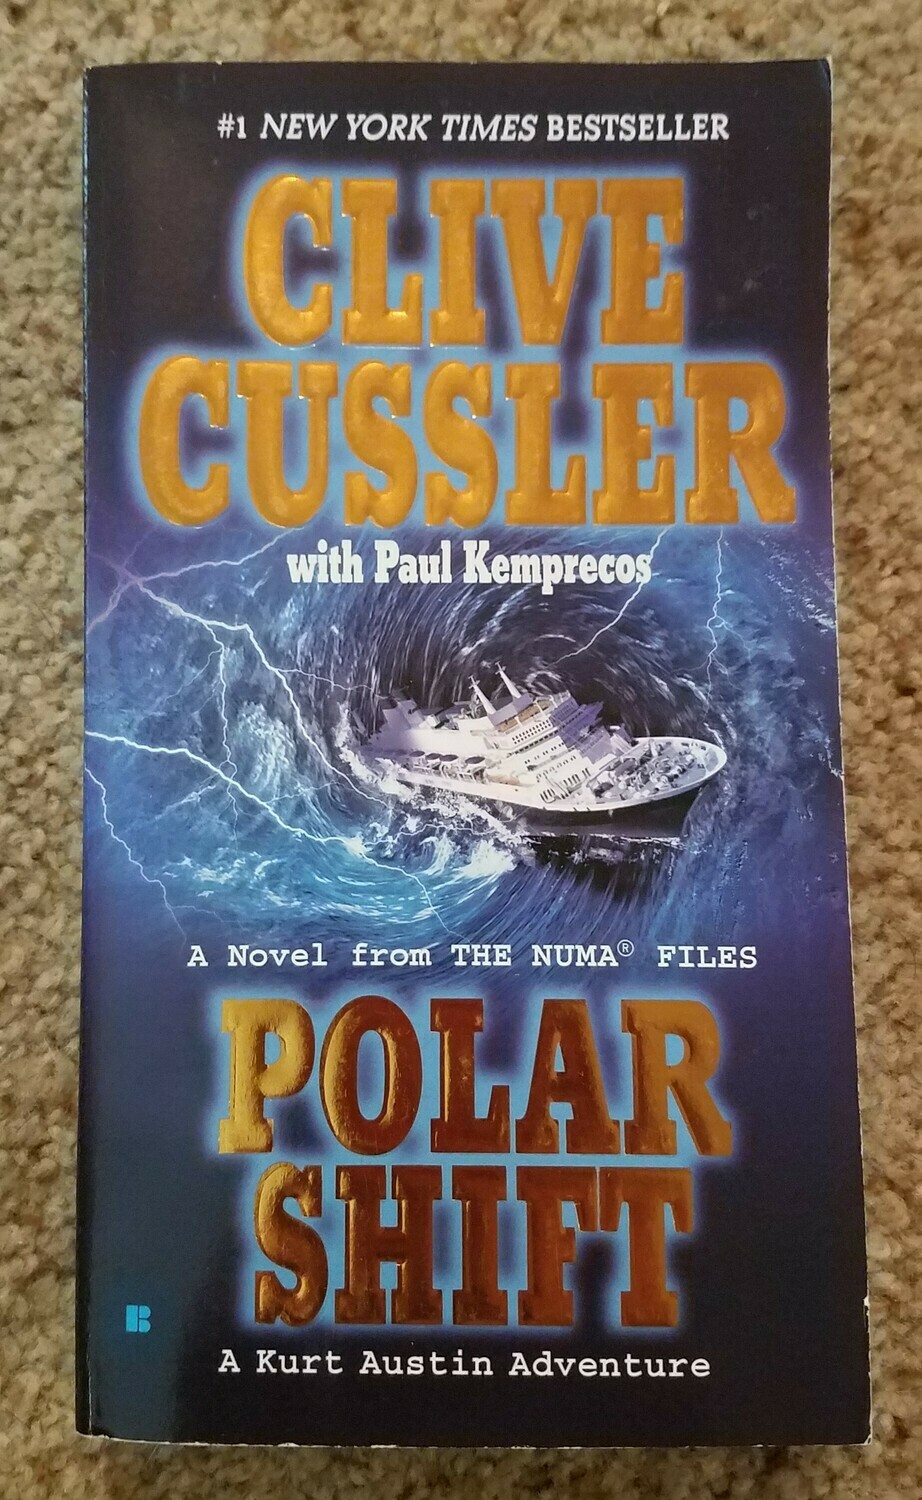 Polar Shift by Clive Cussler with Paul Kemprecos